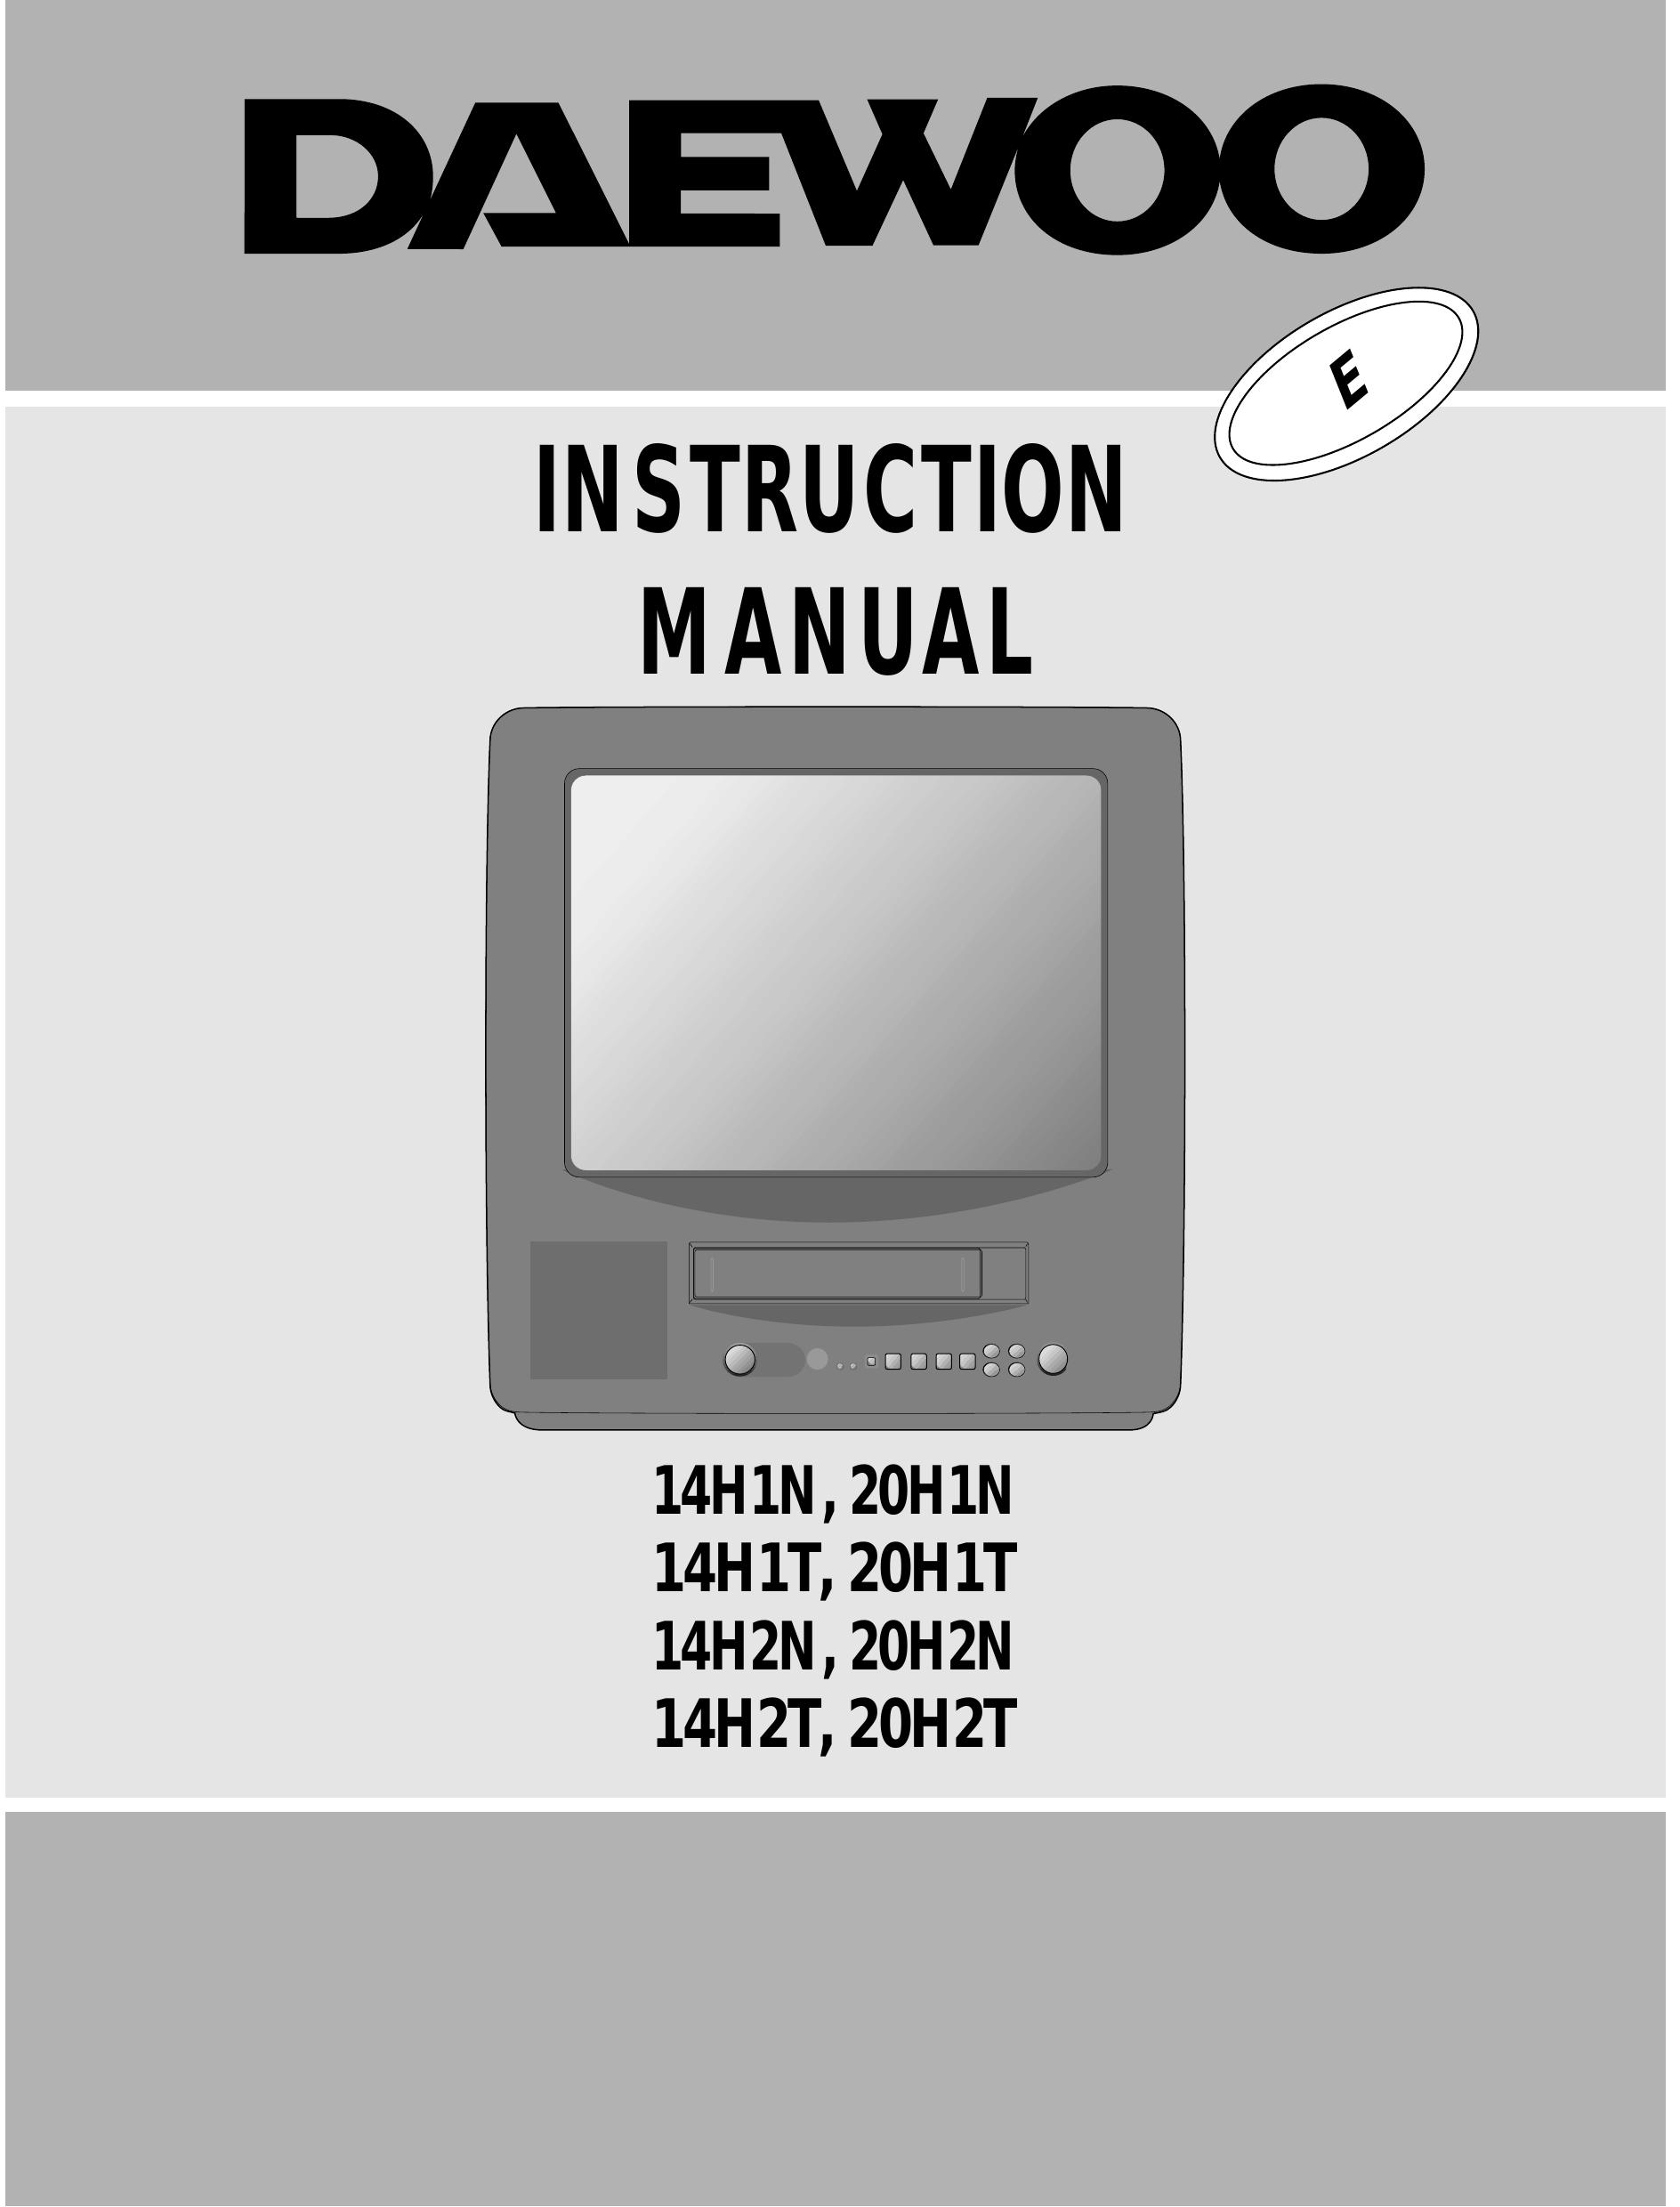 Daewoo 14H1N, 20H1N 14H1T, 20H1T 14H2N, 20H2N 14H2T, 20H2T Handheld TV User Manual (Page 1)